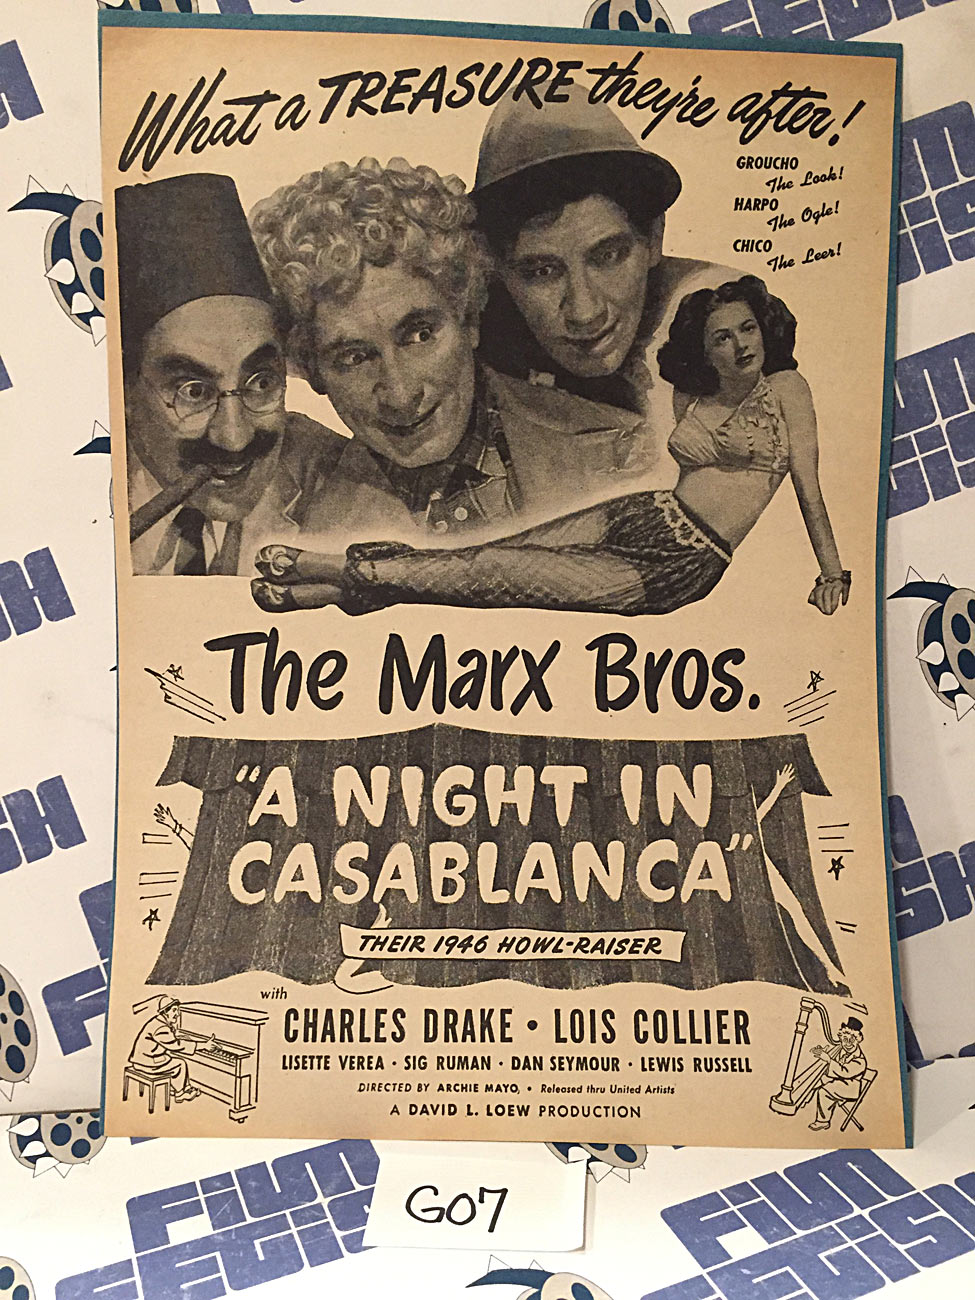 A Night in Casablanca 1946 Original Full-Page Magazine Advertisement Lois Collier Groucho Marx G07